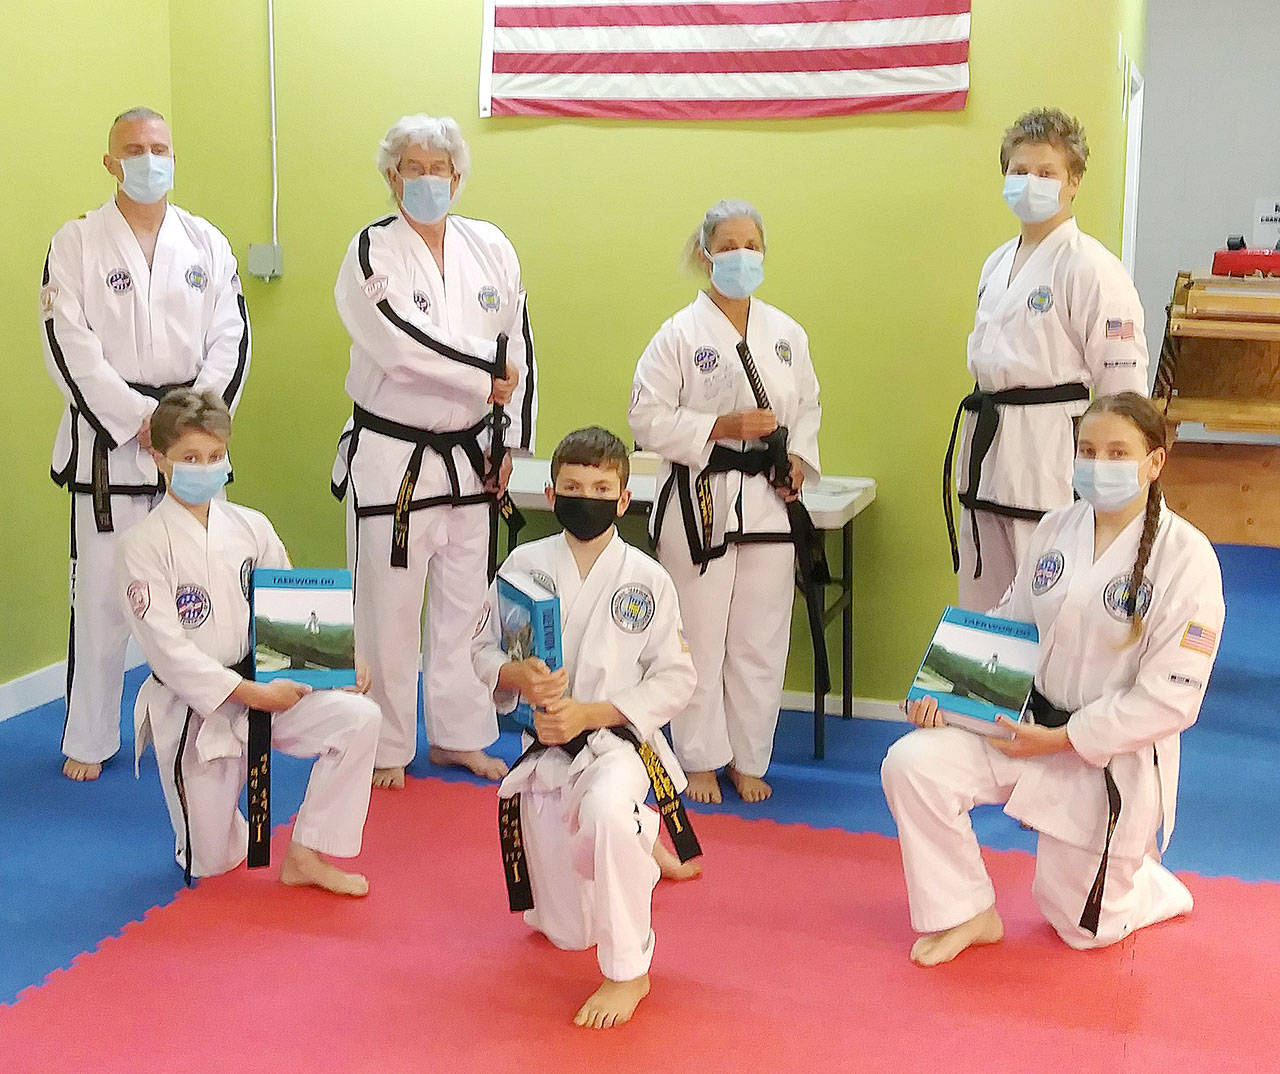 Six students from the Bodystrong Taekwon-do Academy in Sequim recently tested for their black belts in Clackamas, Ore., earlier this month. From left, back row, are Master Brandon Stoppani and students Craig Fahrenholtz, Linda Allen and Adrian Golbeck. From left, front row, are students Aron Golbeck, Hunter Muckley and Jessica Golbeck.